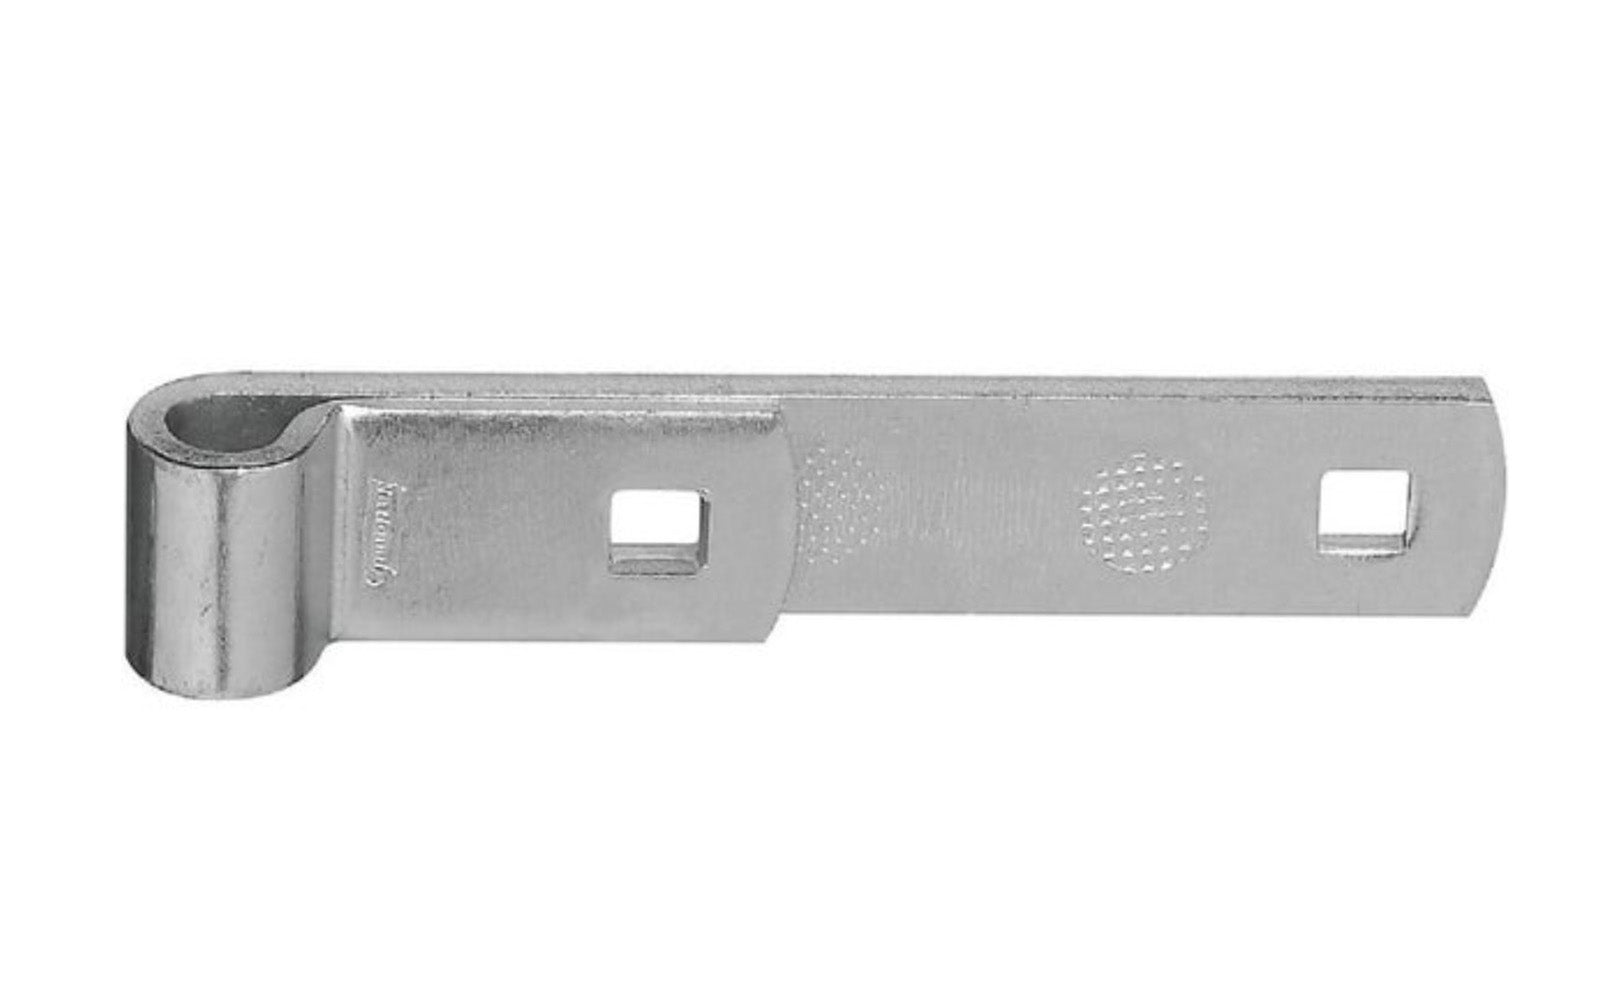 These zinc-plated hinge straps are designed to use with screw hooks for gates. Zinc-plated to resist corrosion. Made of hot-rolled steel. Coated with 